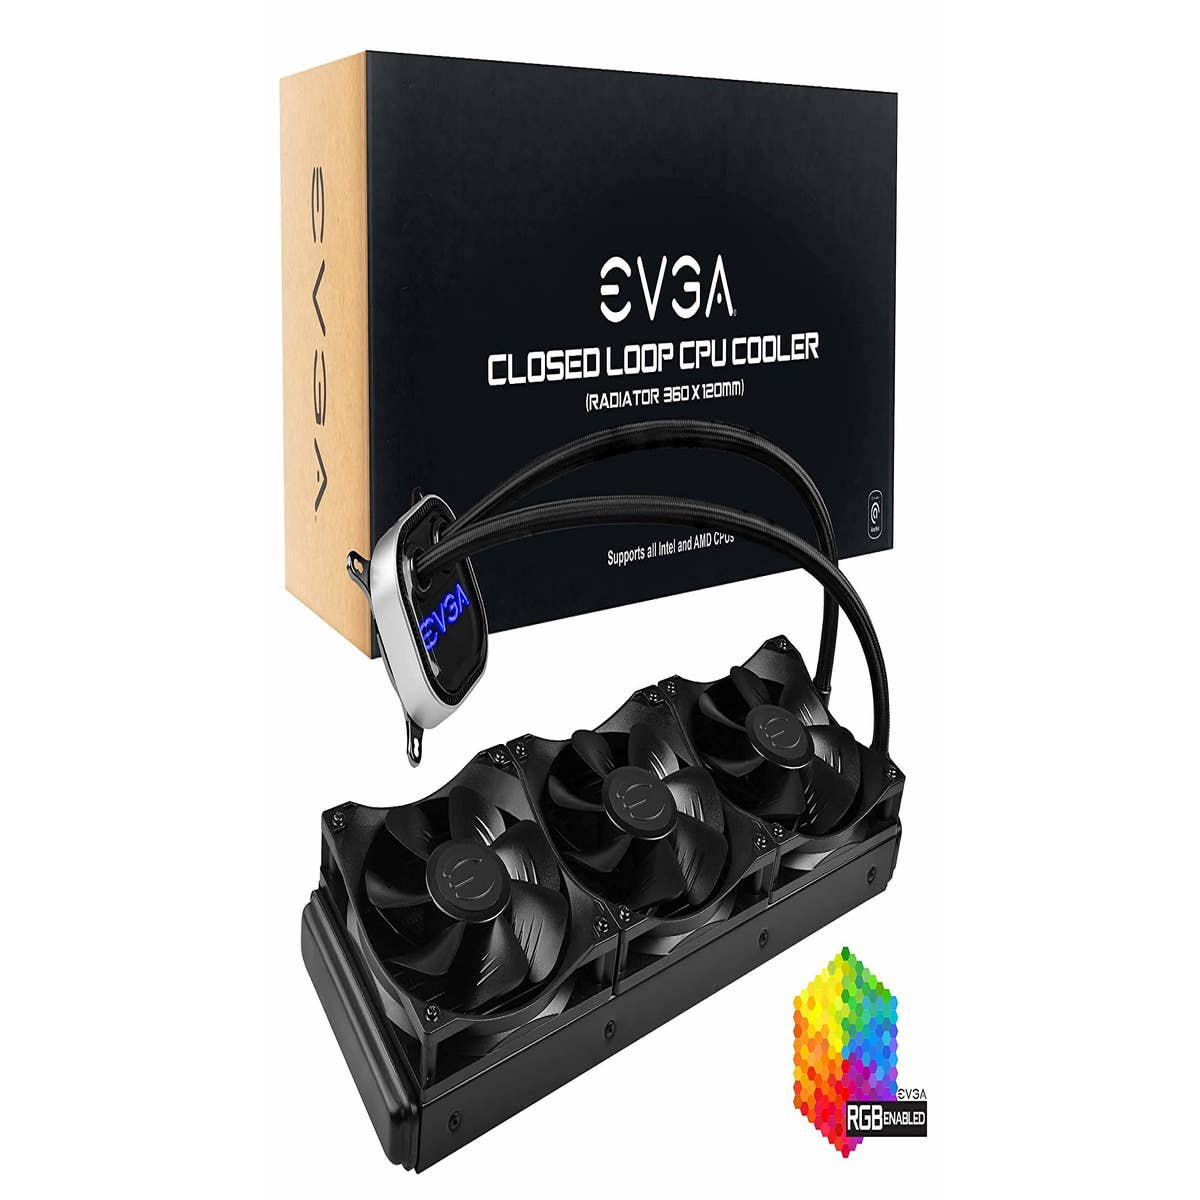 Pick up an EVGA 360mm AiO for £82 after a 25% discount on